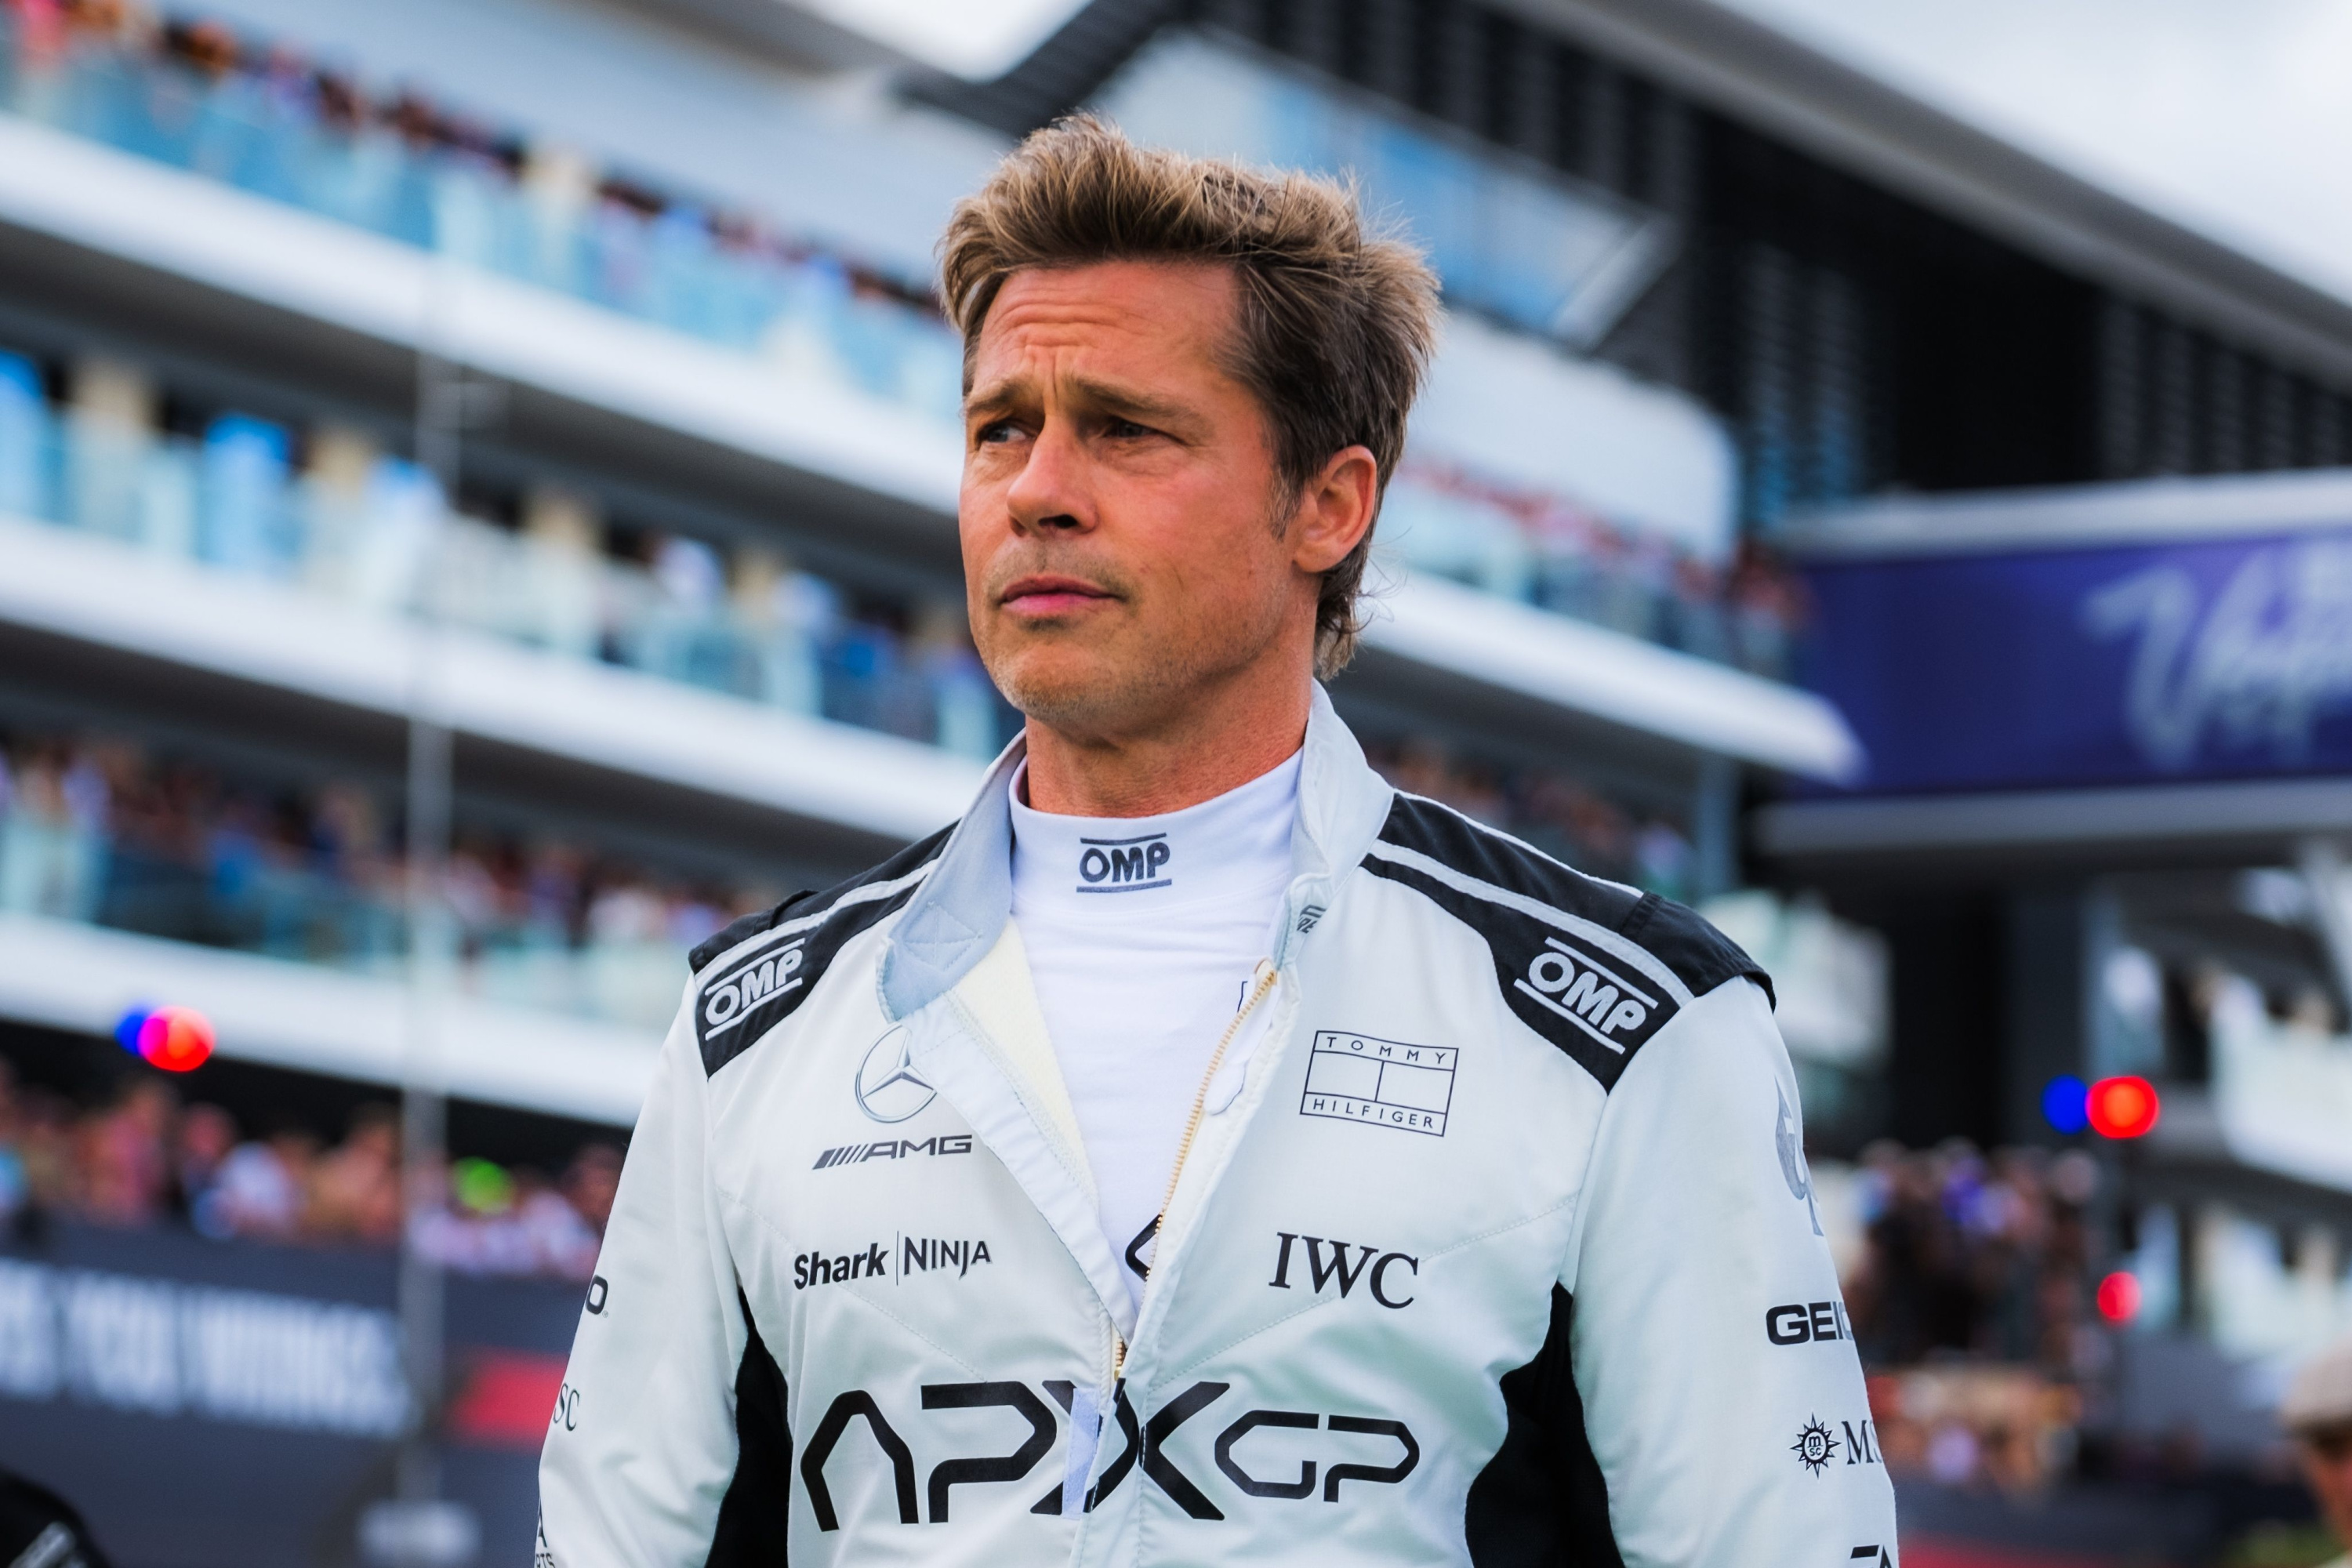 Why was Brad Pitt at an F1 race this weekend?